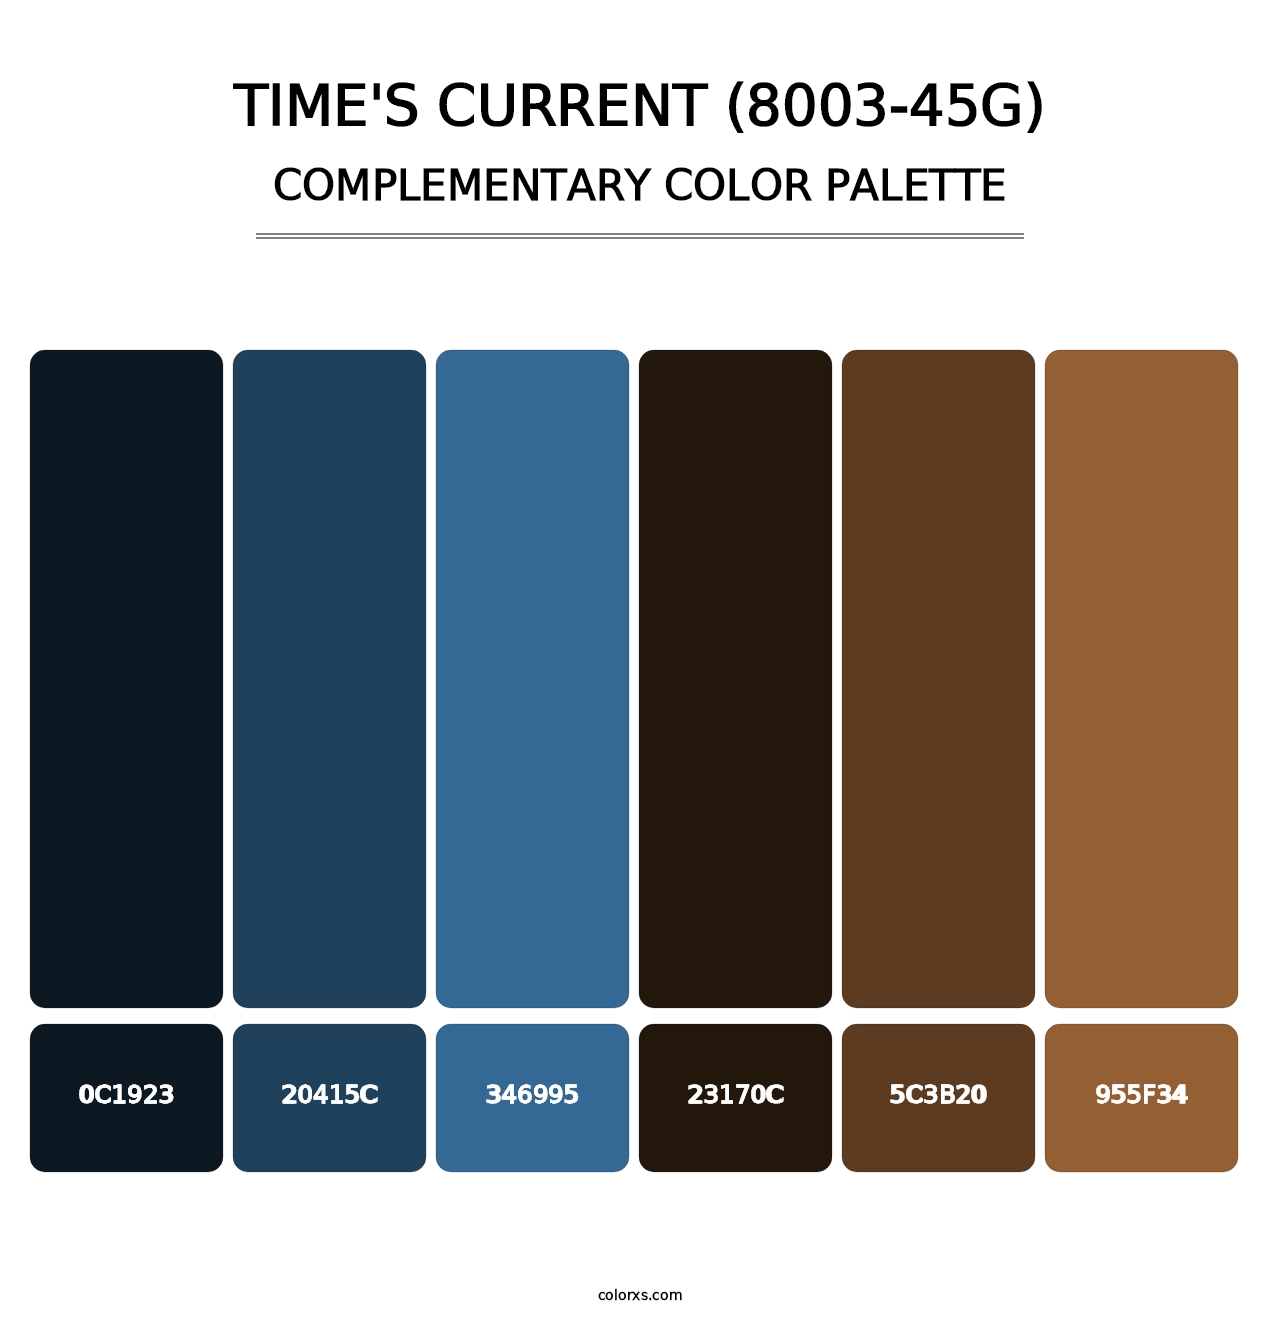 Time's Current (8003-45G) - Complementary Color Palette